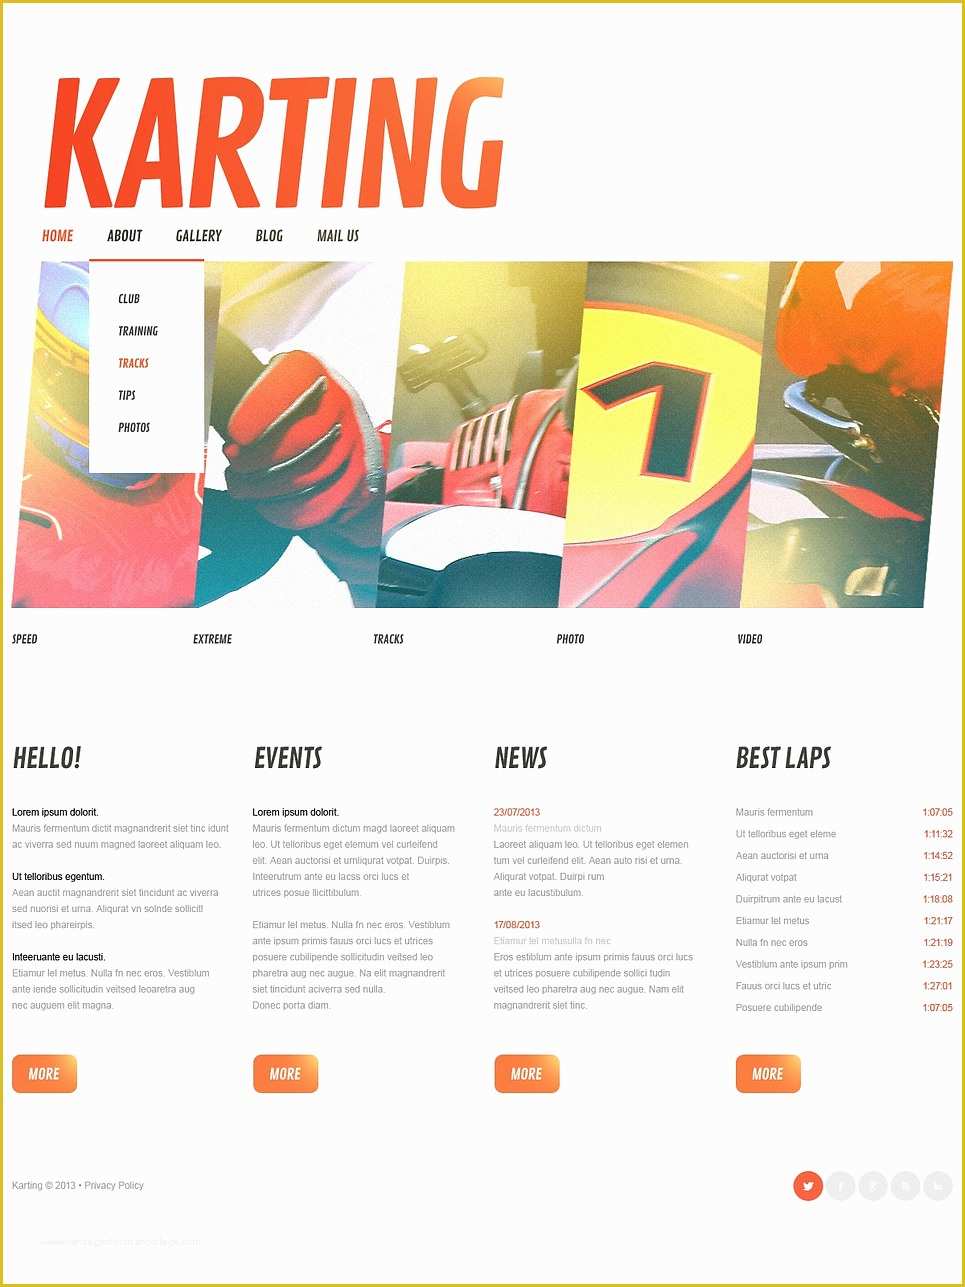 Training Website Templates Free Download Of Karting Training Website Template Web Design Templates